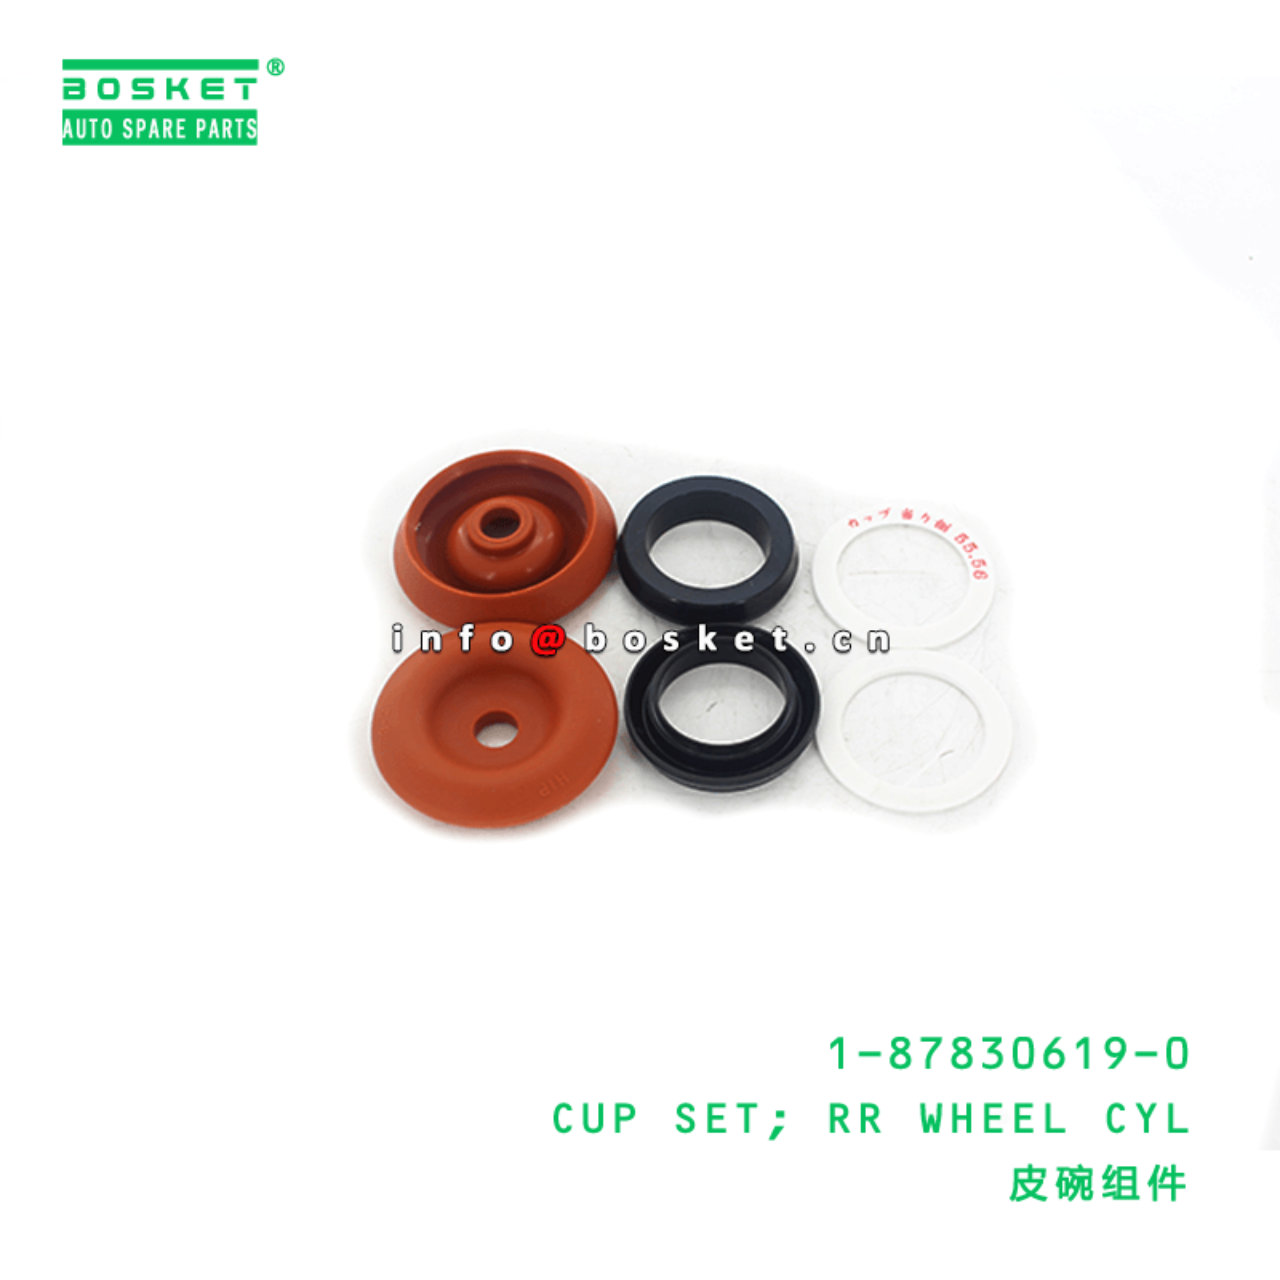  1-87830619-0 Rear Wheel Cylinder Cup Set 1878306190 Suitable for ISUZU LV